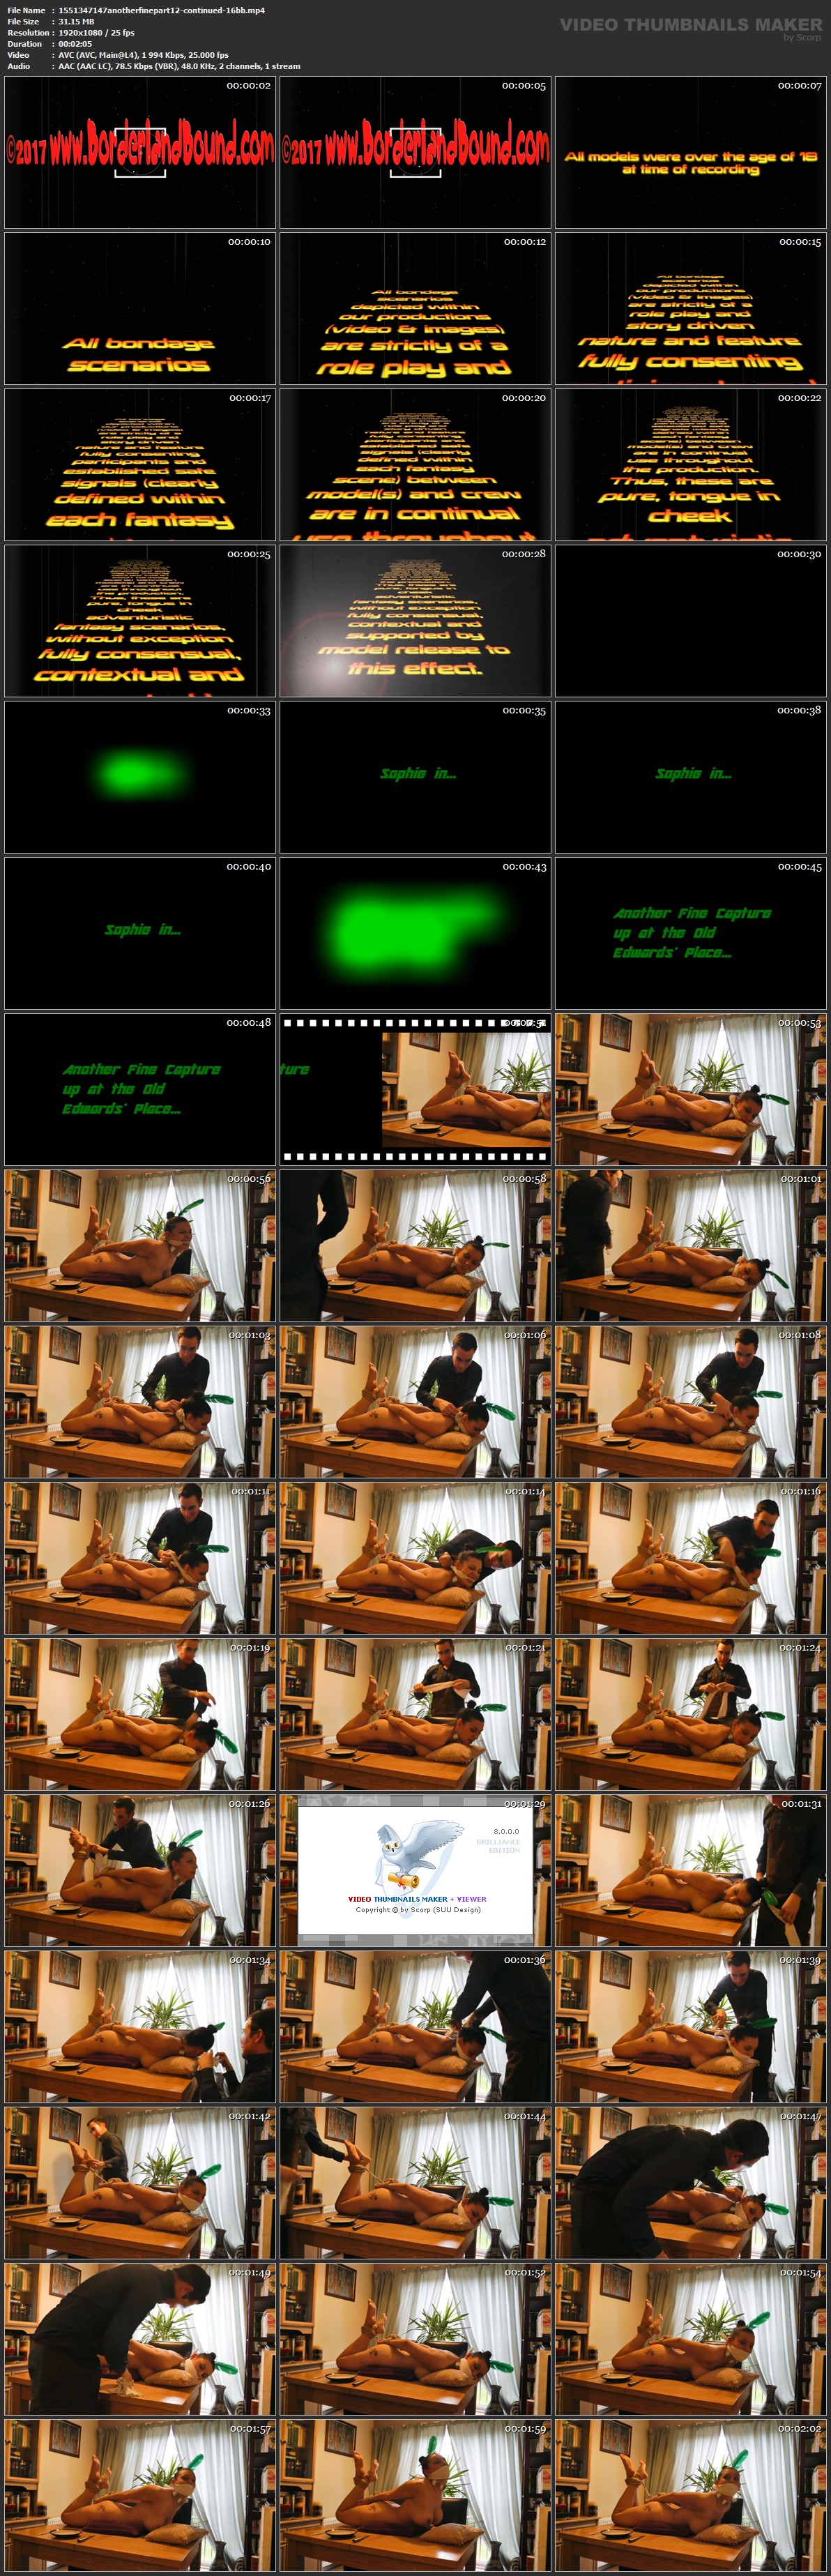 1551347147 anotherfinepart 12 continued 16 bb mp 4